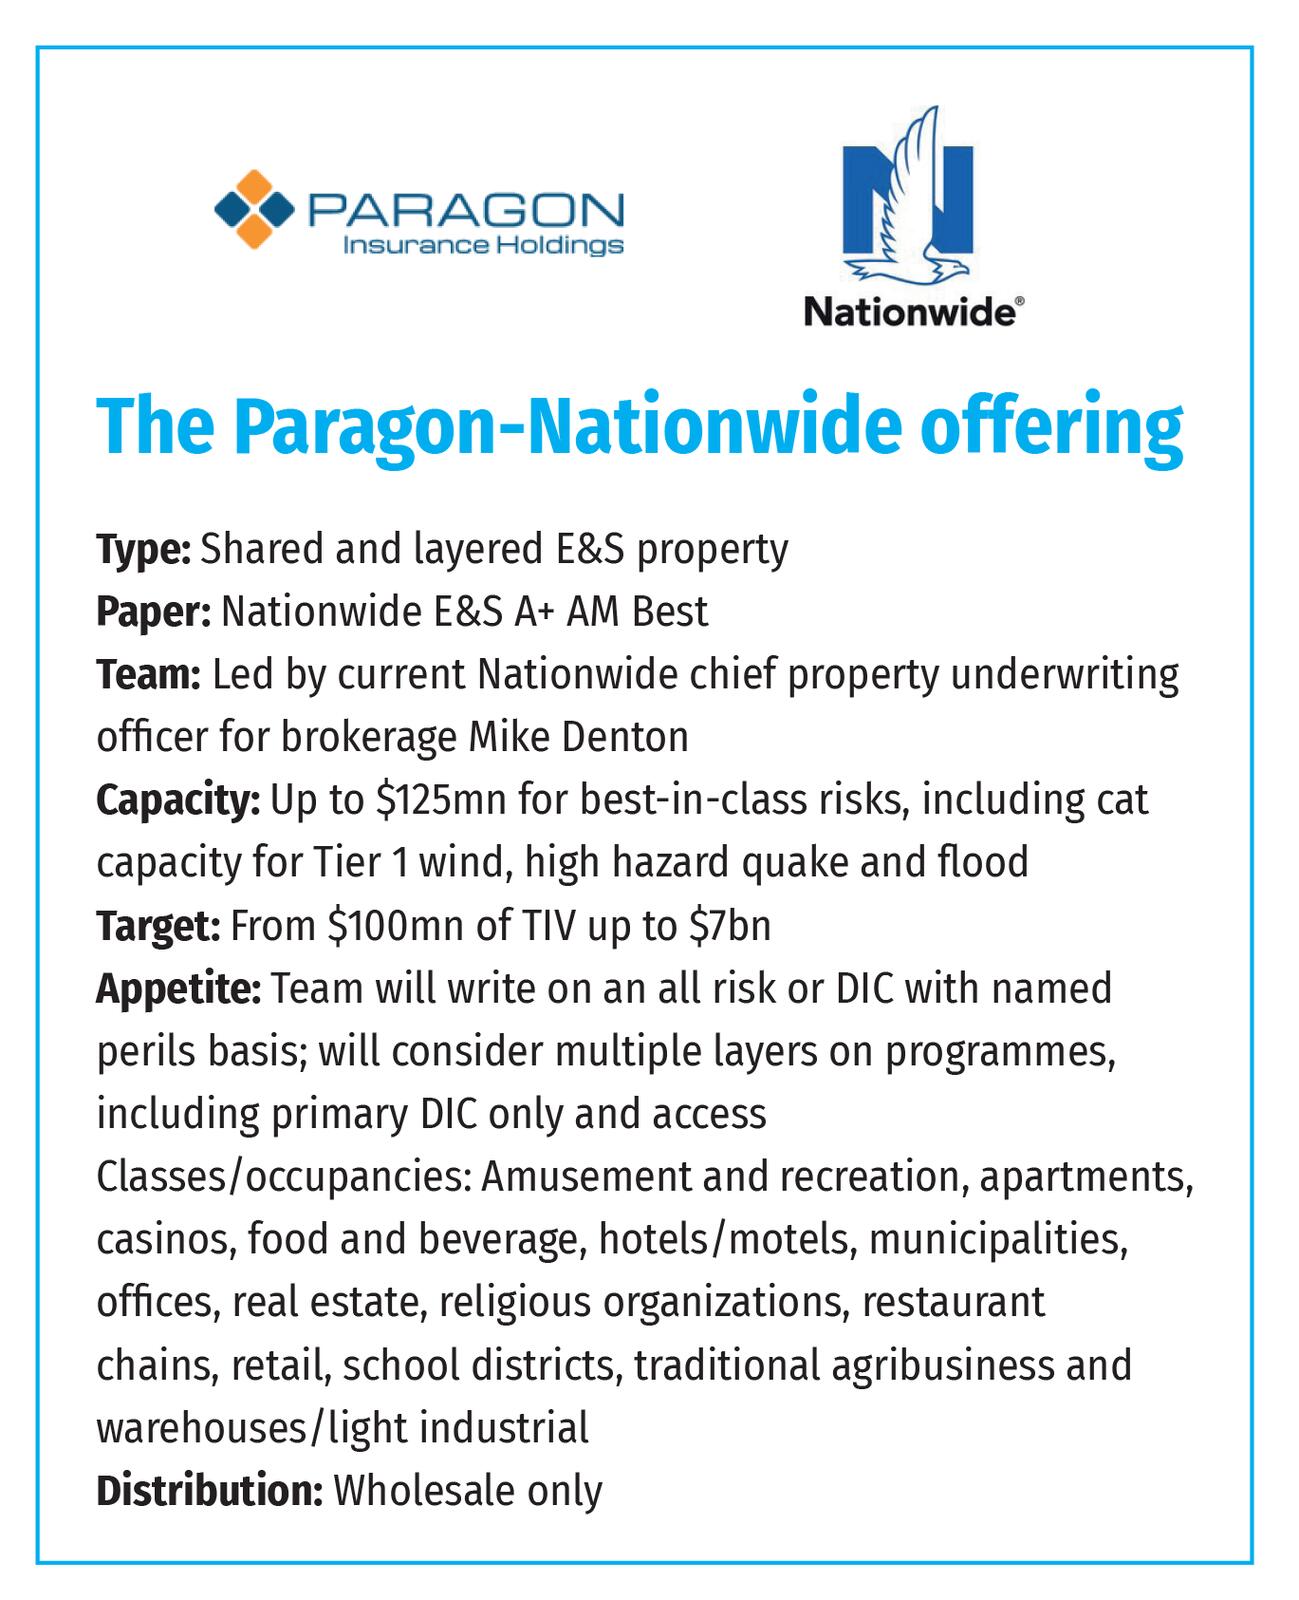 The Paragon-Nationwide offering